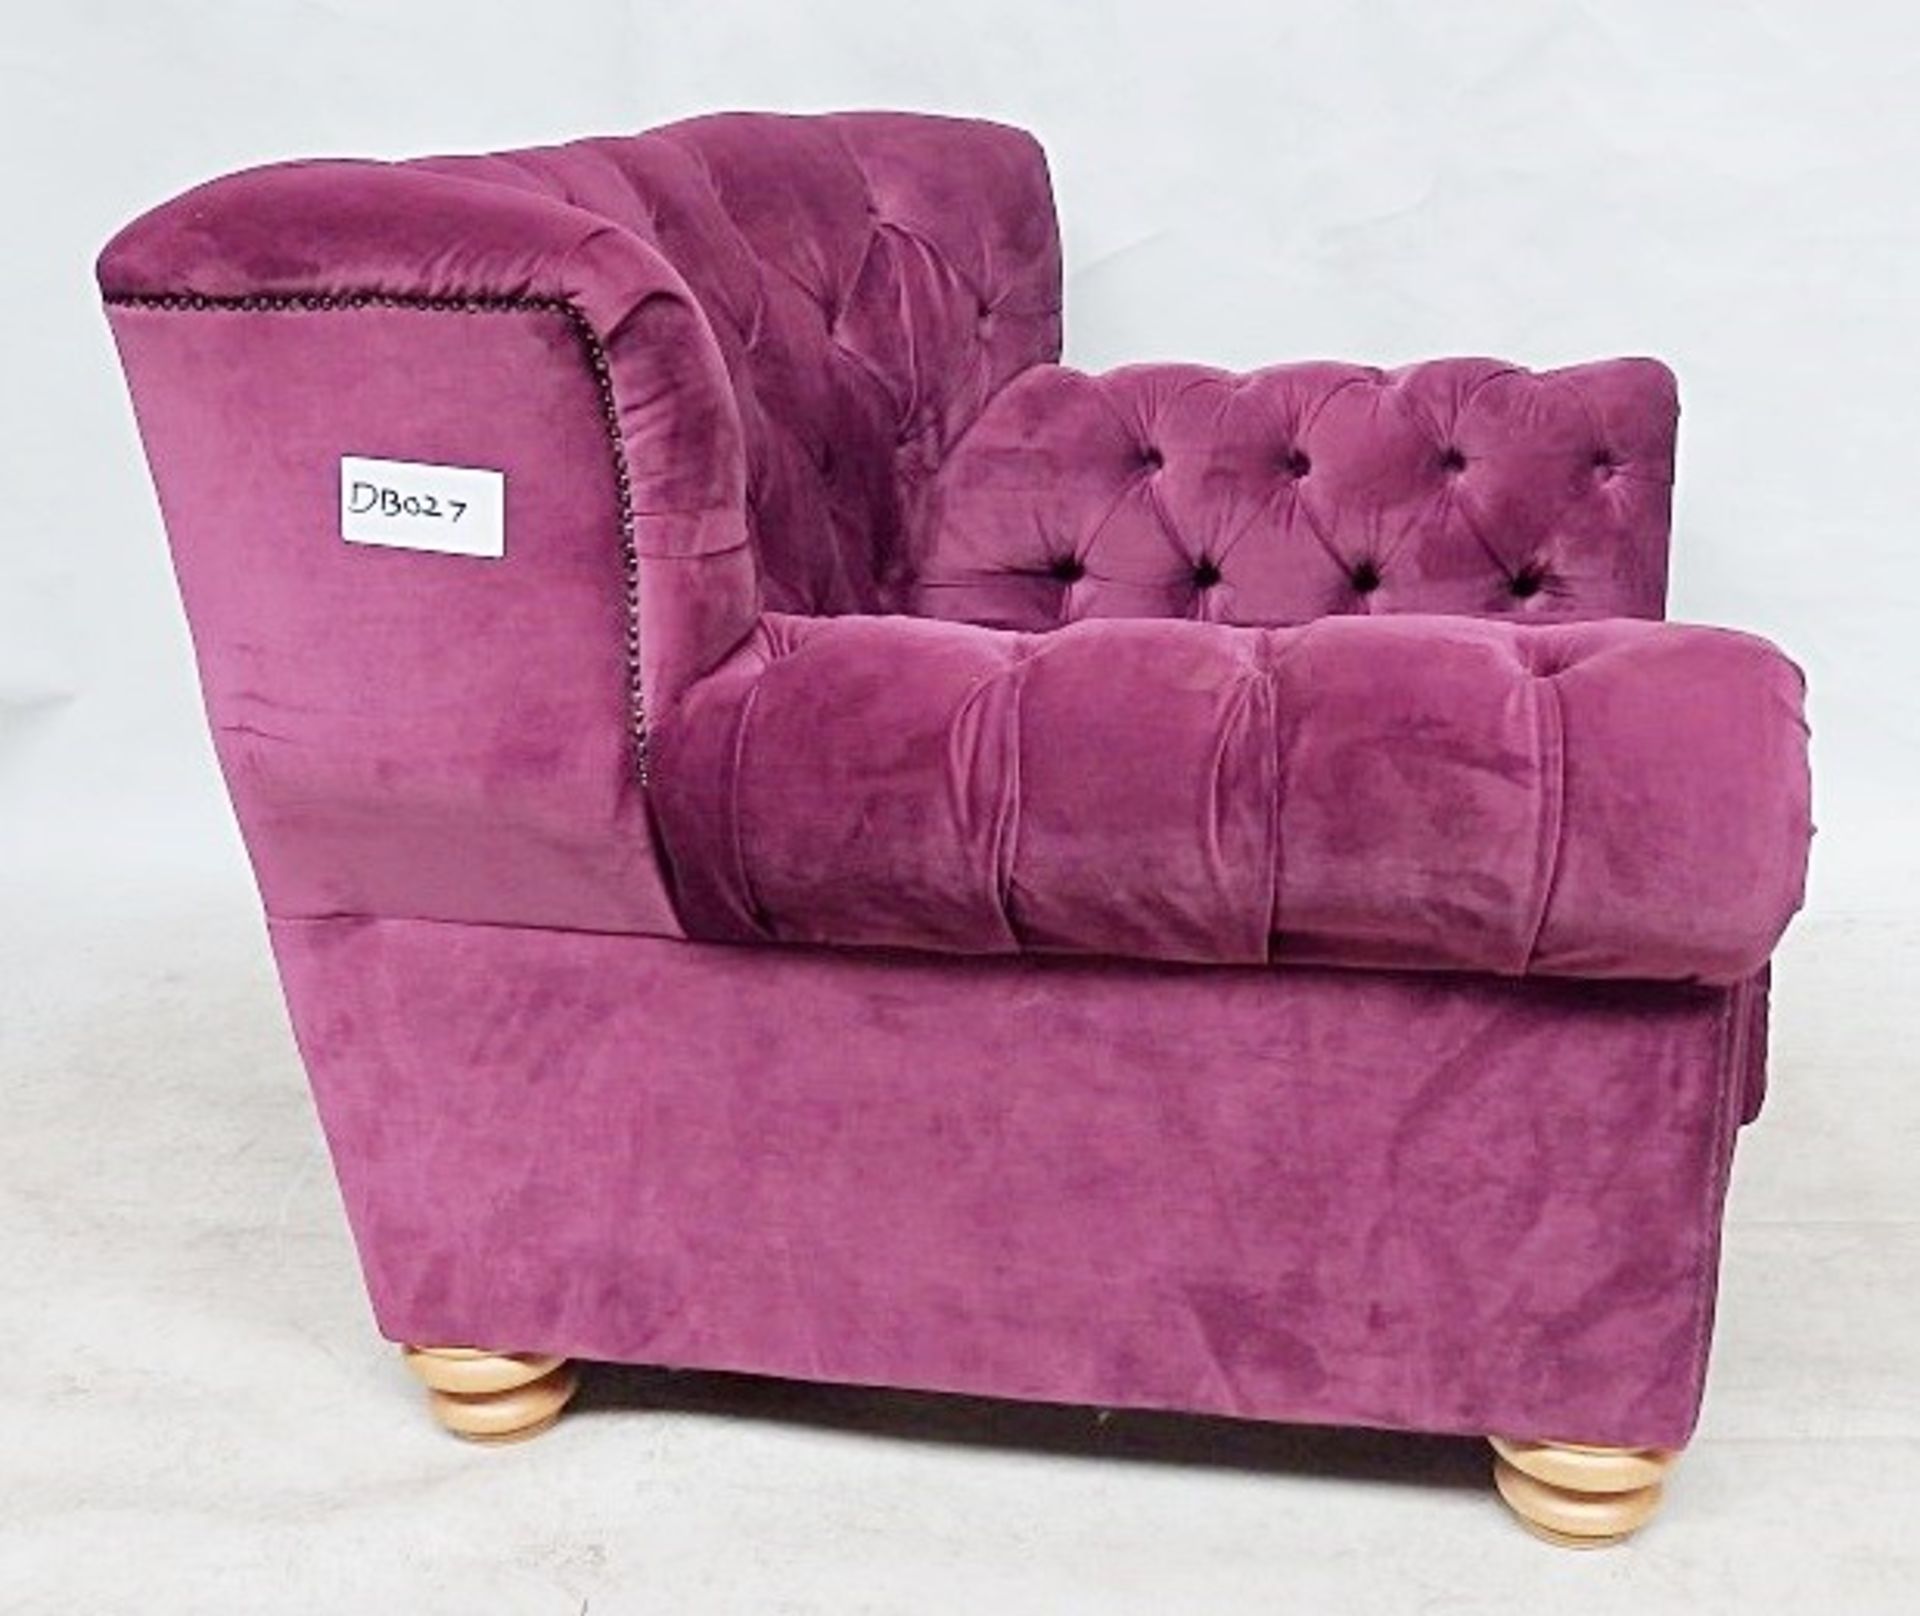 1 x Bespoke Oversized Chair (Cuddle Chair) - Upholstered In A Ritch Magenta Chenille - Expertly - Image 9 of 10